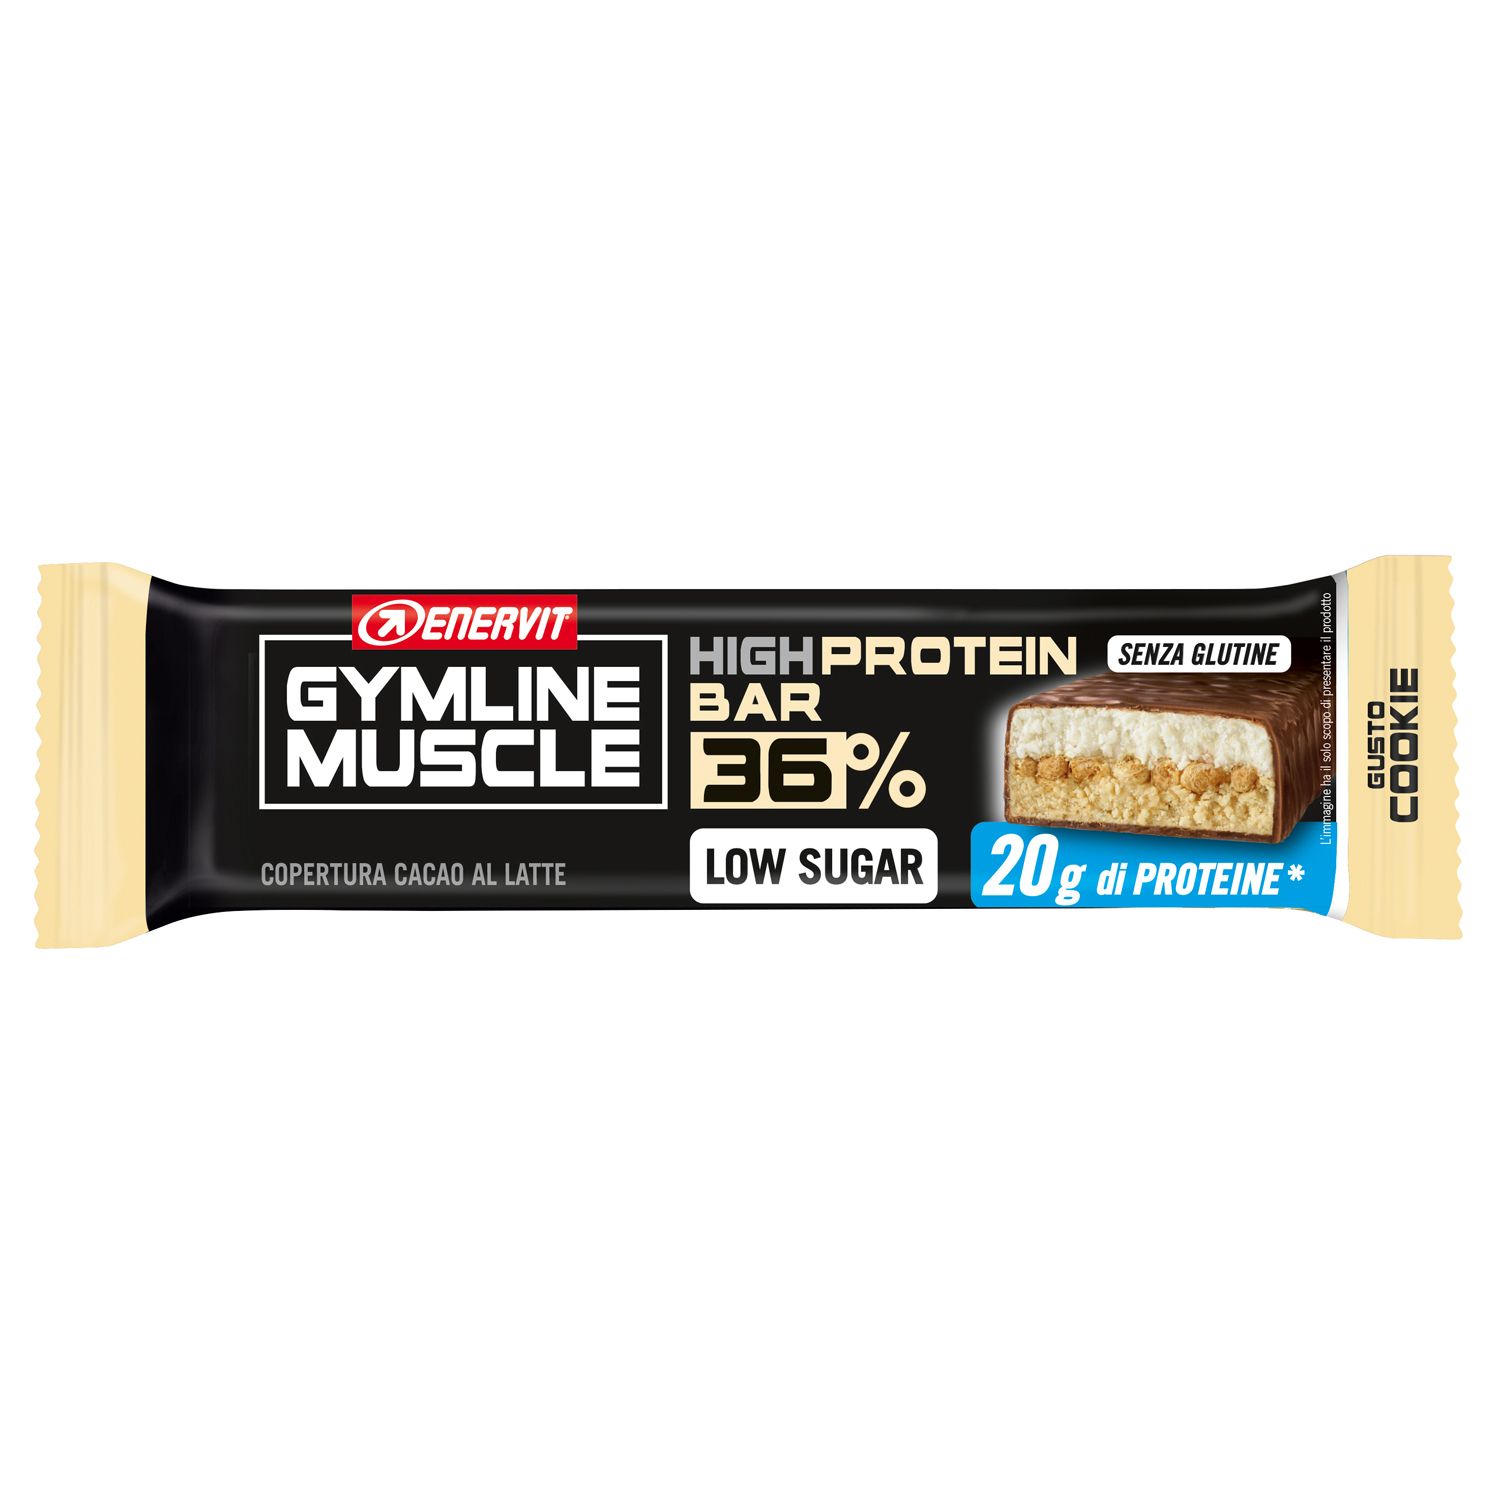 ENERVIT® Gymline Muscle High Protein Bar 36% Gusto Cookie